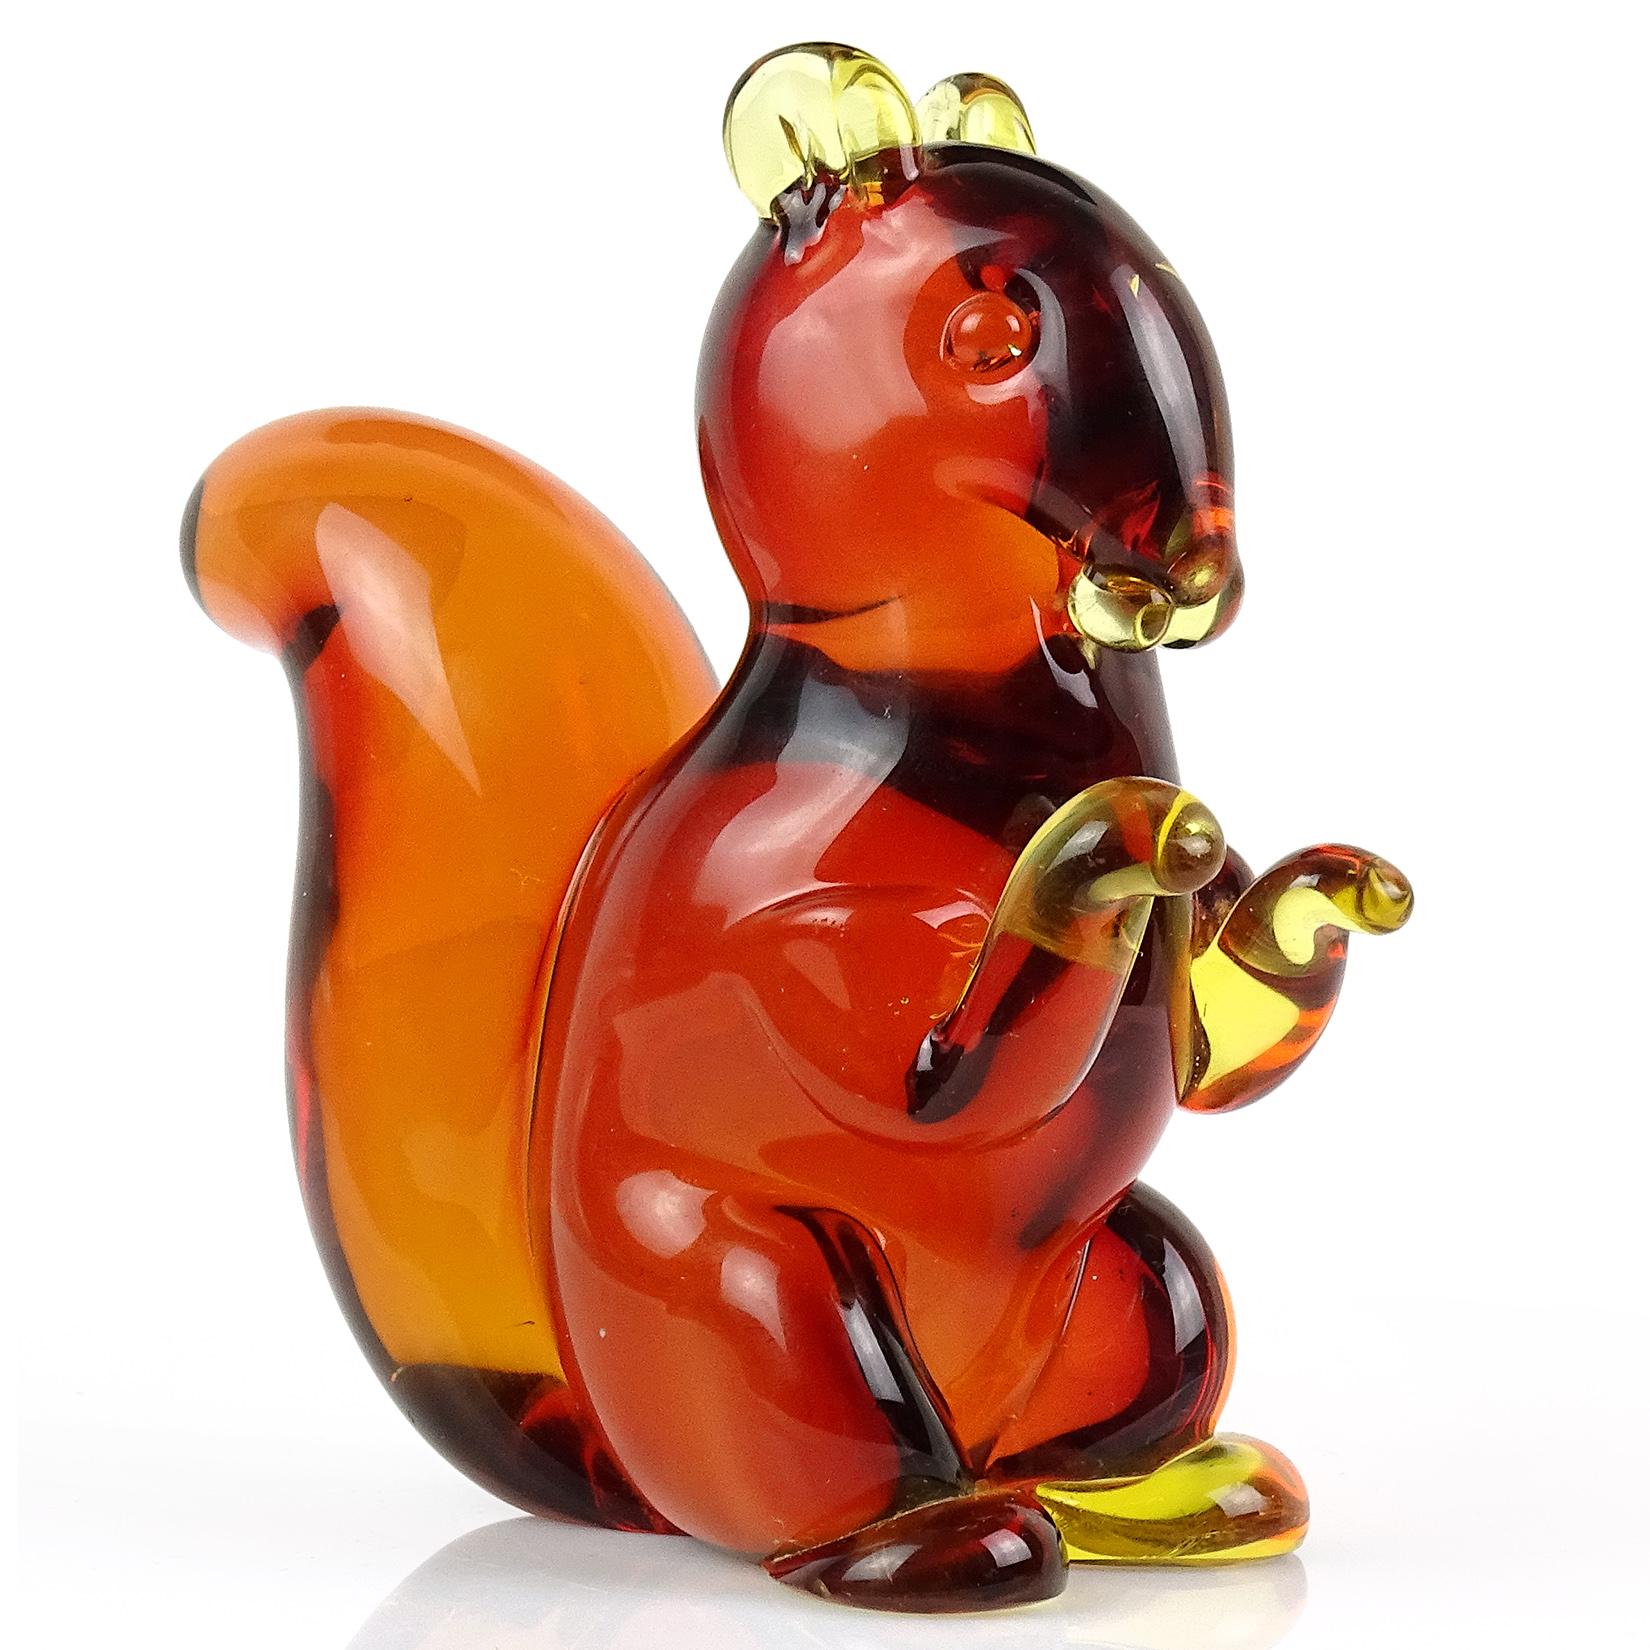 Beautiful and very cute, vintage Murano hand blown Sommerso red orange, yellow Italian art glass squirrel sculpture / figurine. Documented to designer Archimede Seguso. The red is mainly on its body, and the tail is orange. You can see the overlay